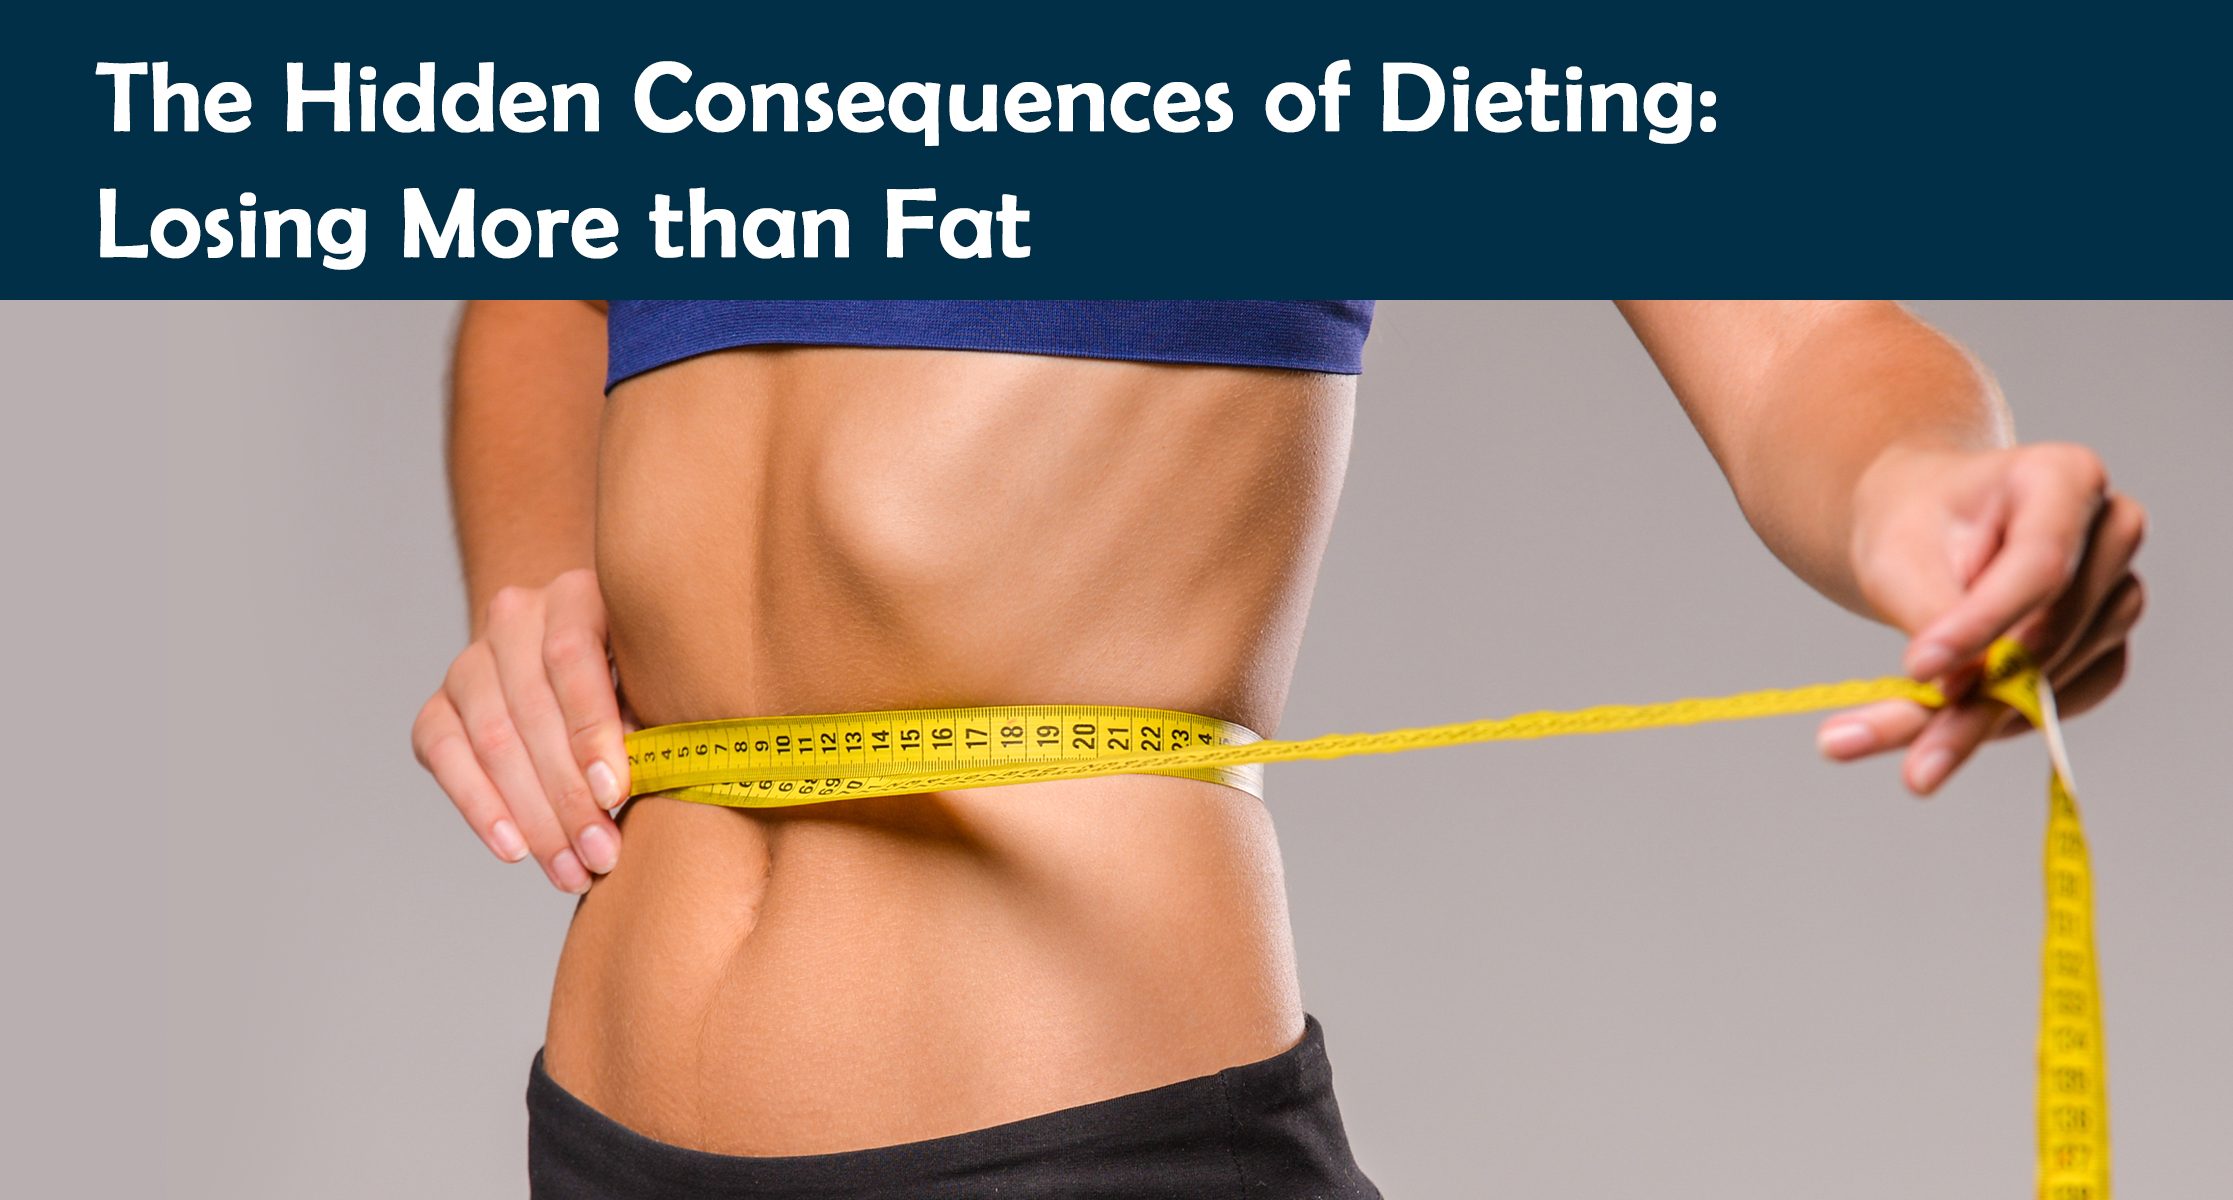 The Hidden Consequences of Dieting: Losing More than Fat